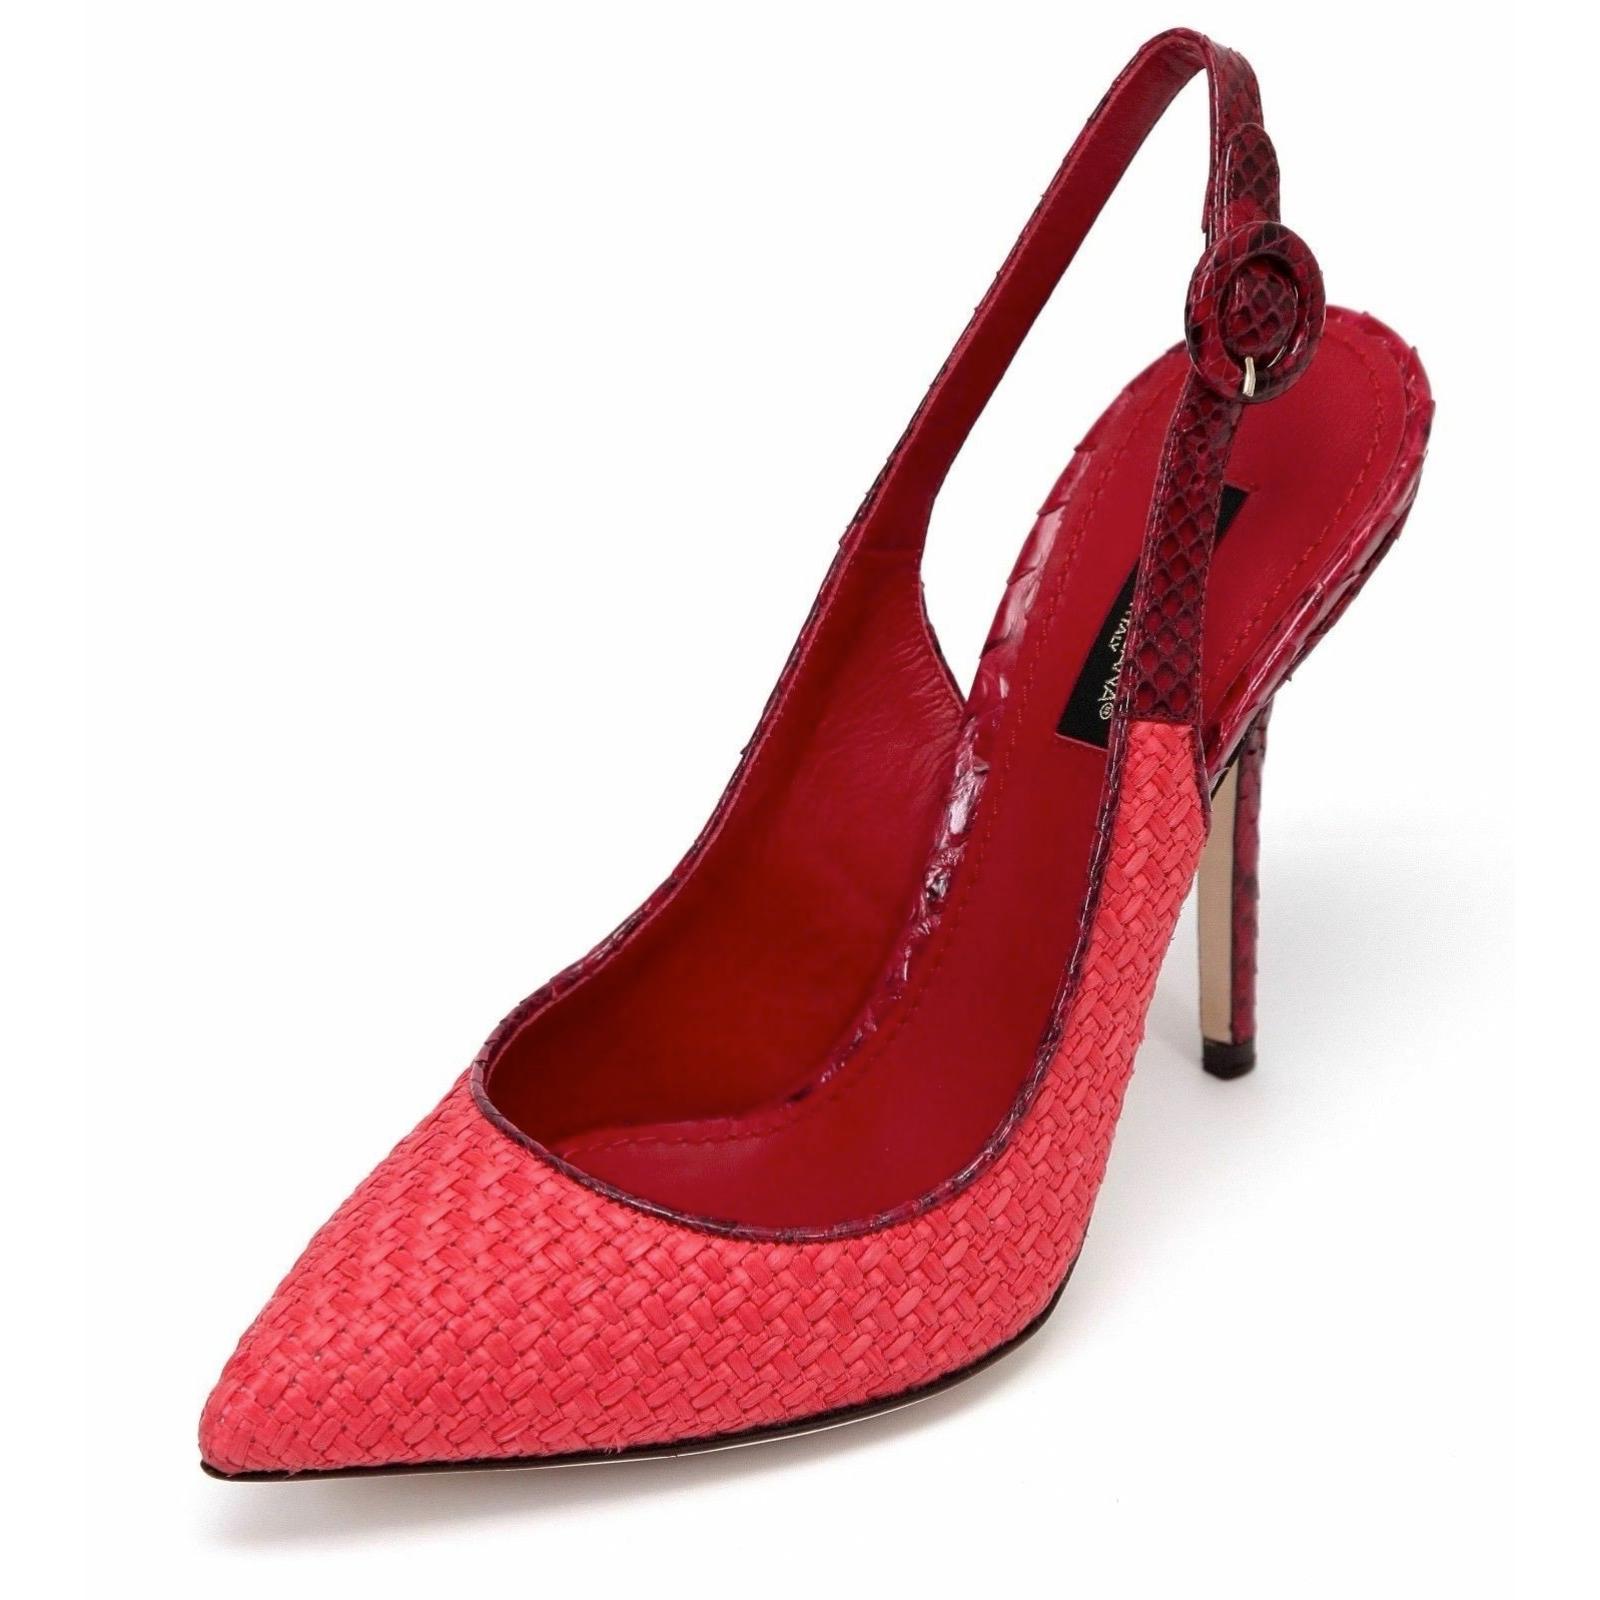 GUARANTEED AUTHENTIC DOLCE & GABBANA RED RAFFIA PYTHON SLINGBACK PUMP
Brand New In Box

Retail excluding tax, $995


Details:
- Red raffia pointed slingback pump.
- Red python trim, covered buckle and heel.
- Leather lining and sole.
- Comes with